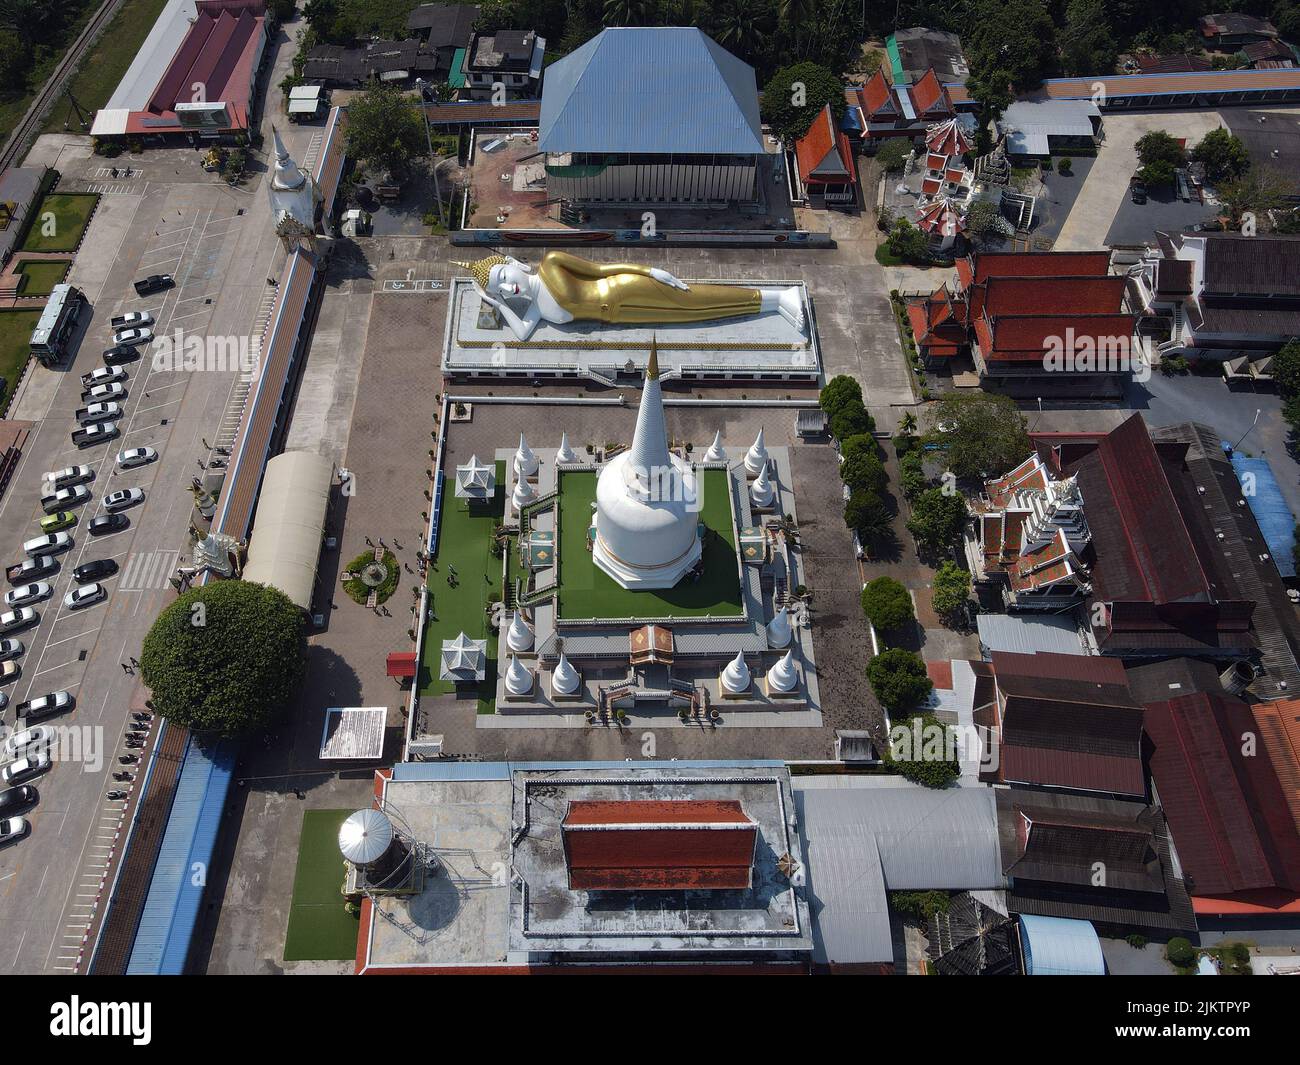 An aerial view of the Wat That Noi temple in Thailand with the reclined Buddha statue next to it Stock Photo